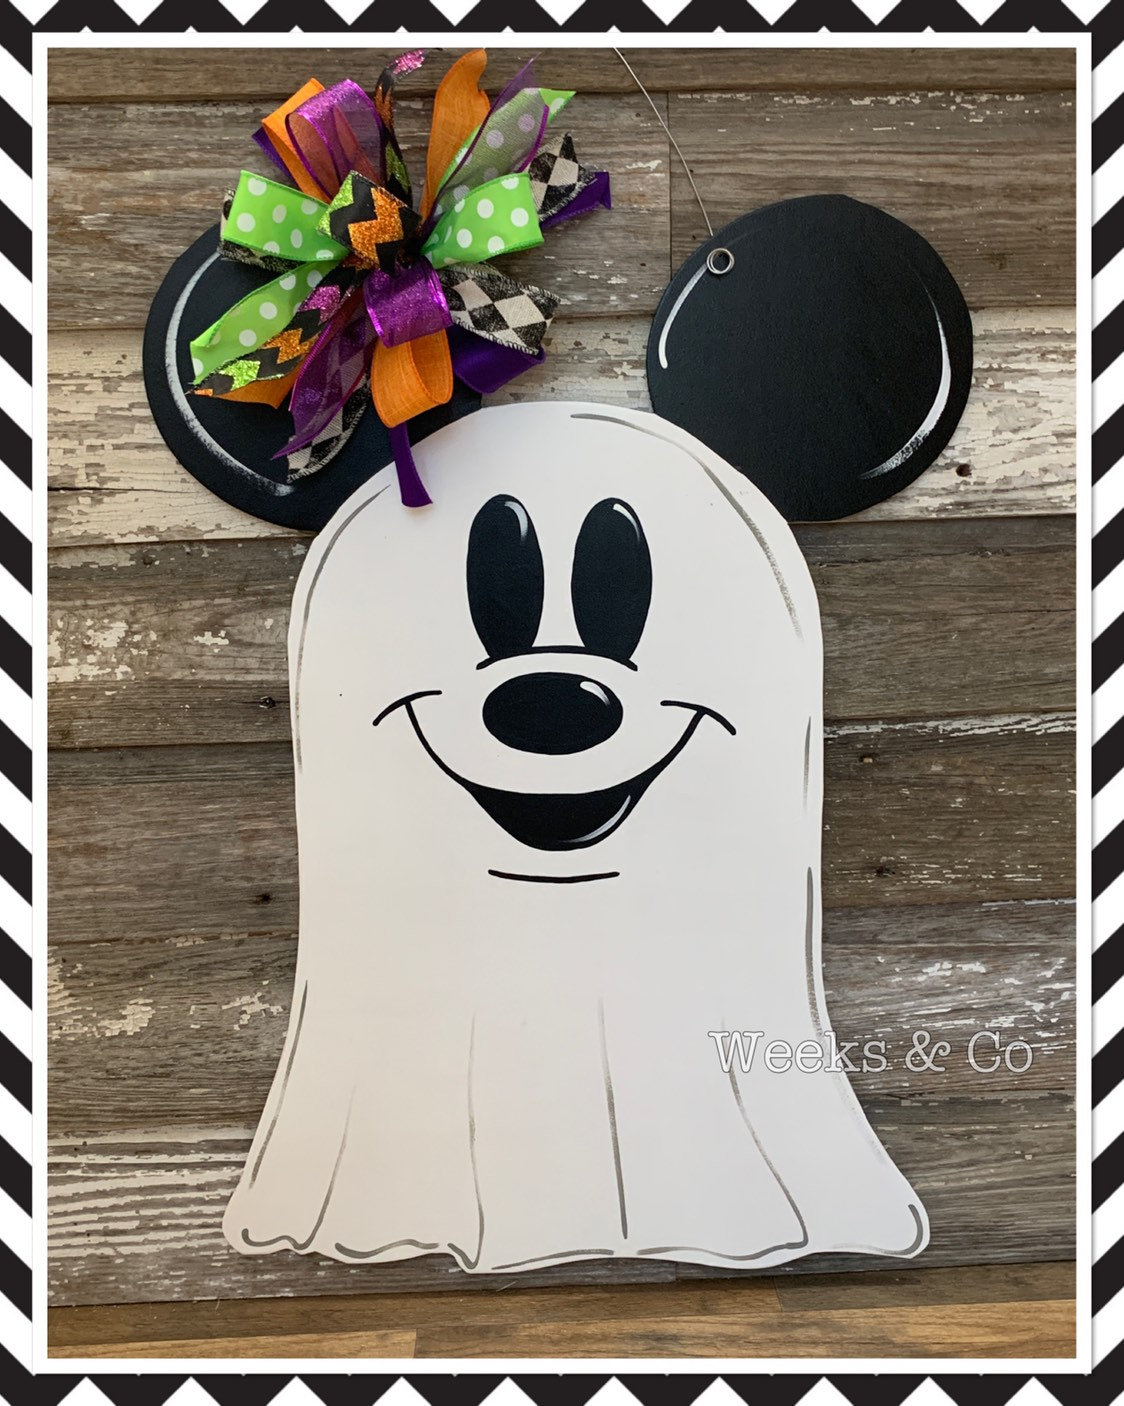 Disney® Mickey Mouse Popcorn Popper with Accessories - Crazy Gray Ghost